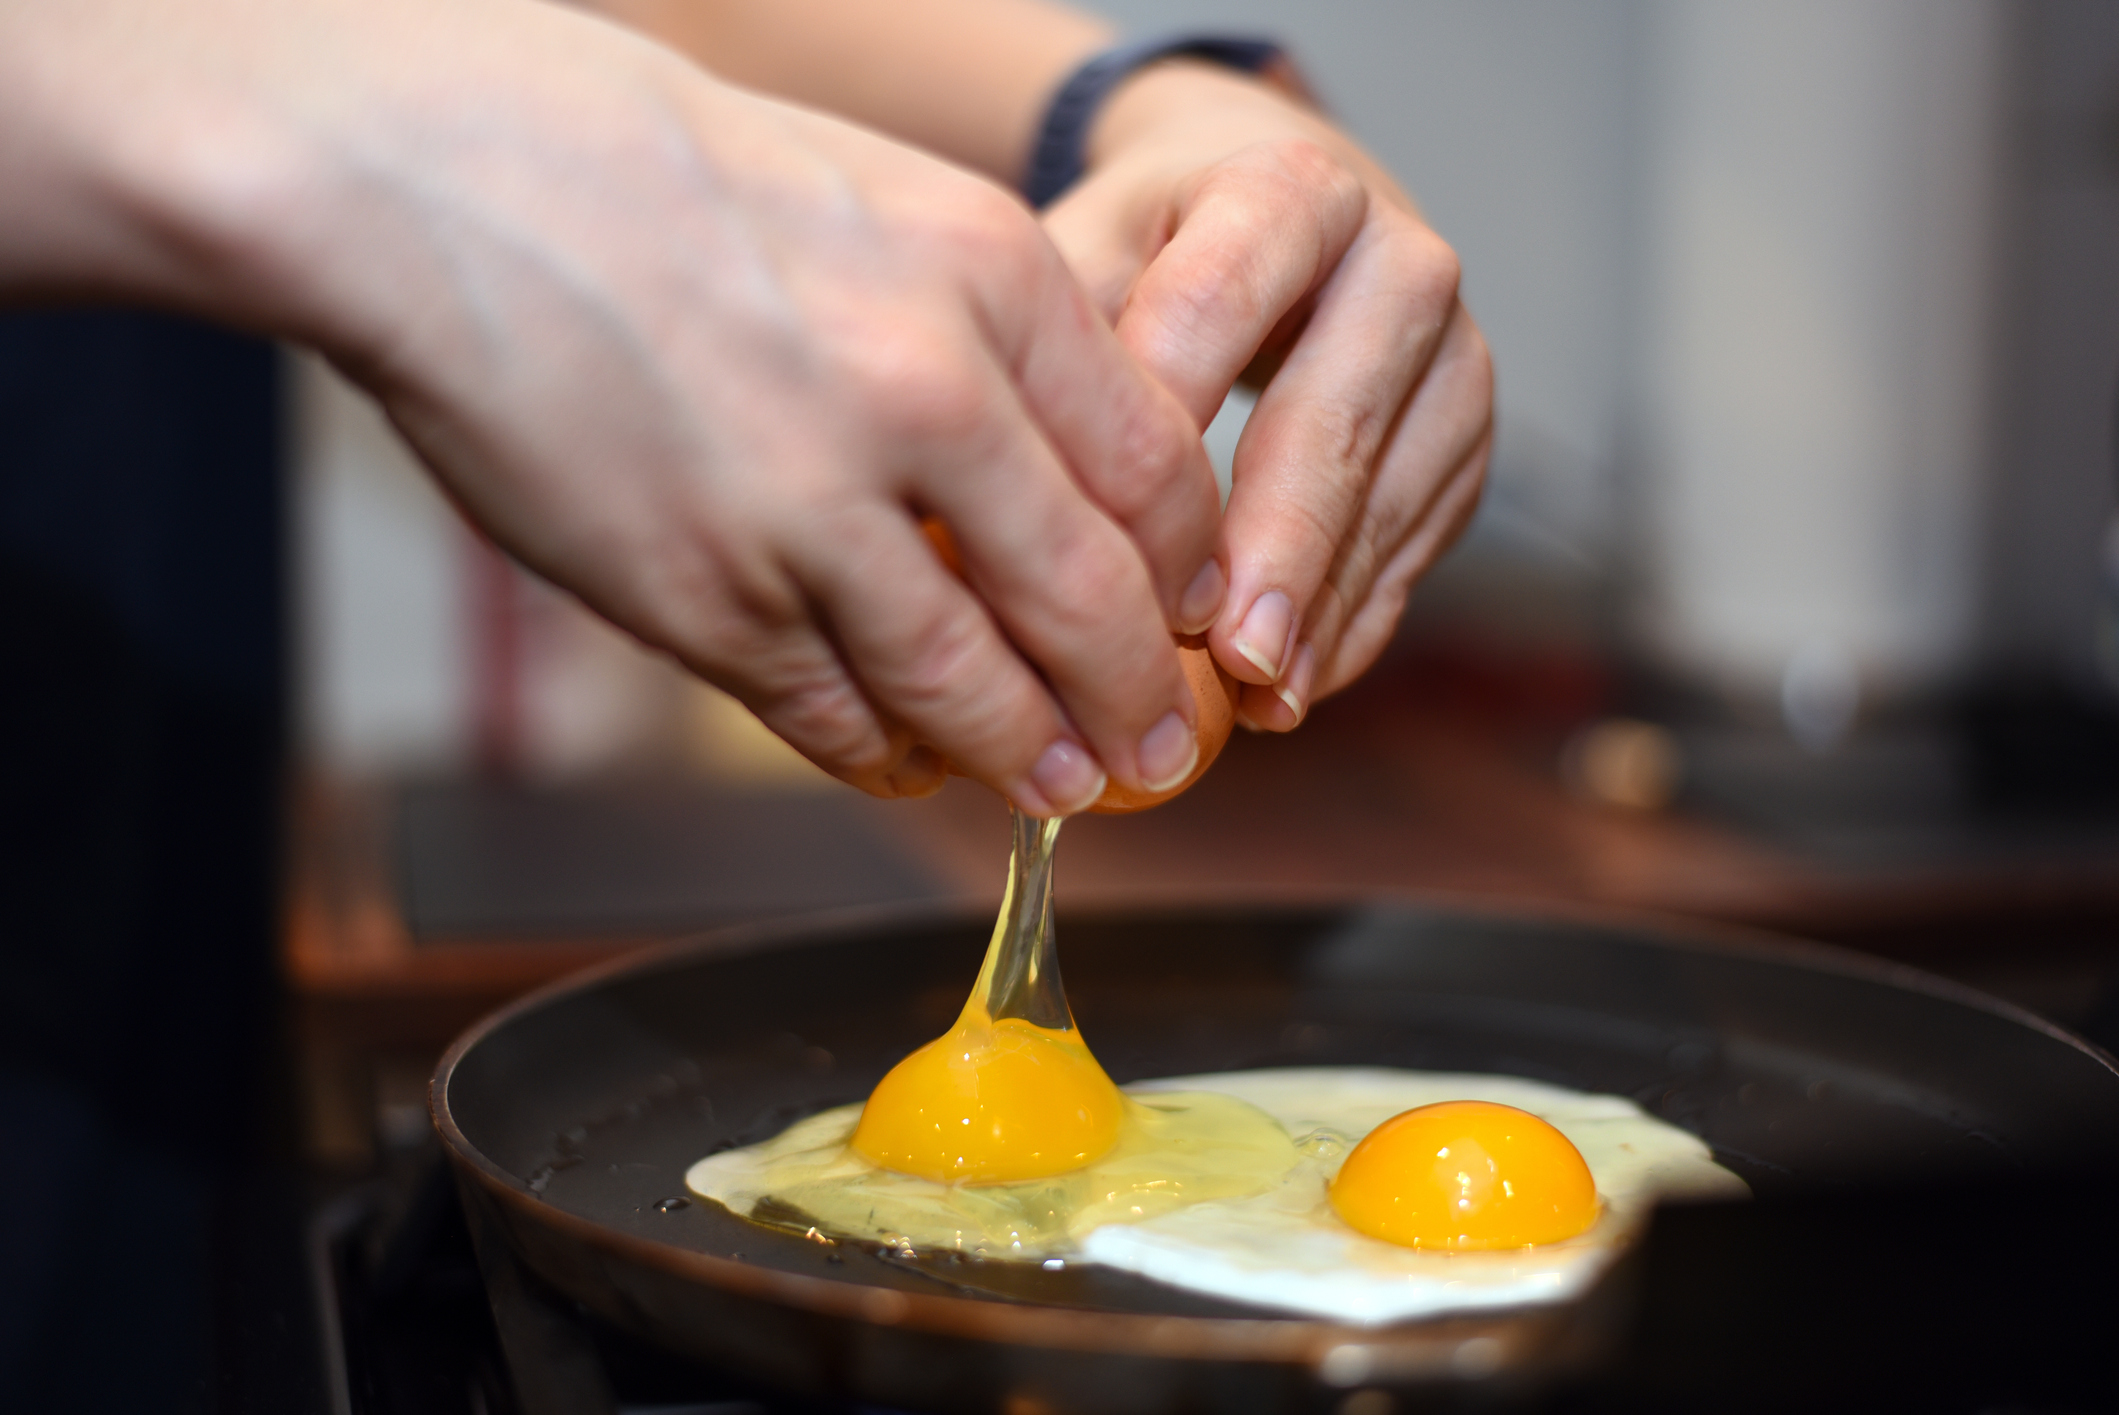 Can You Cook An Egg In A Hot Car?